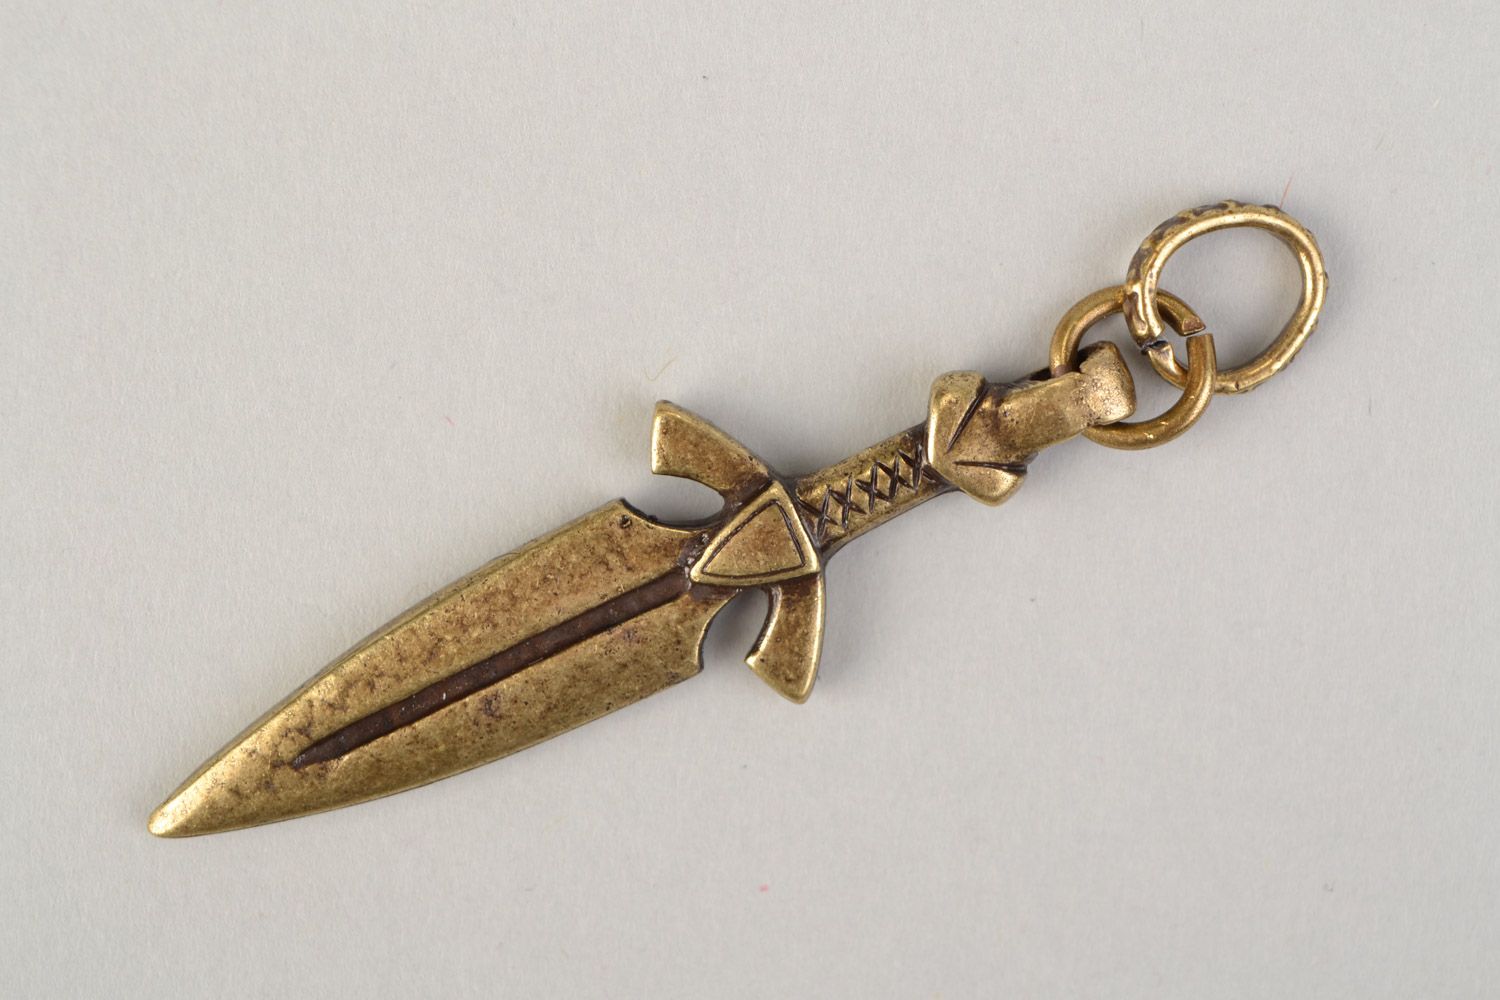 Handmade pendant in the shape of bronze knife cast with the use of permanent mold photo 4